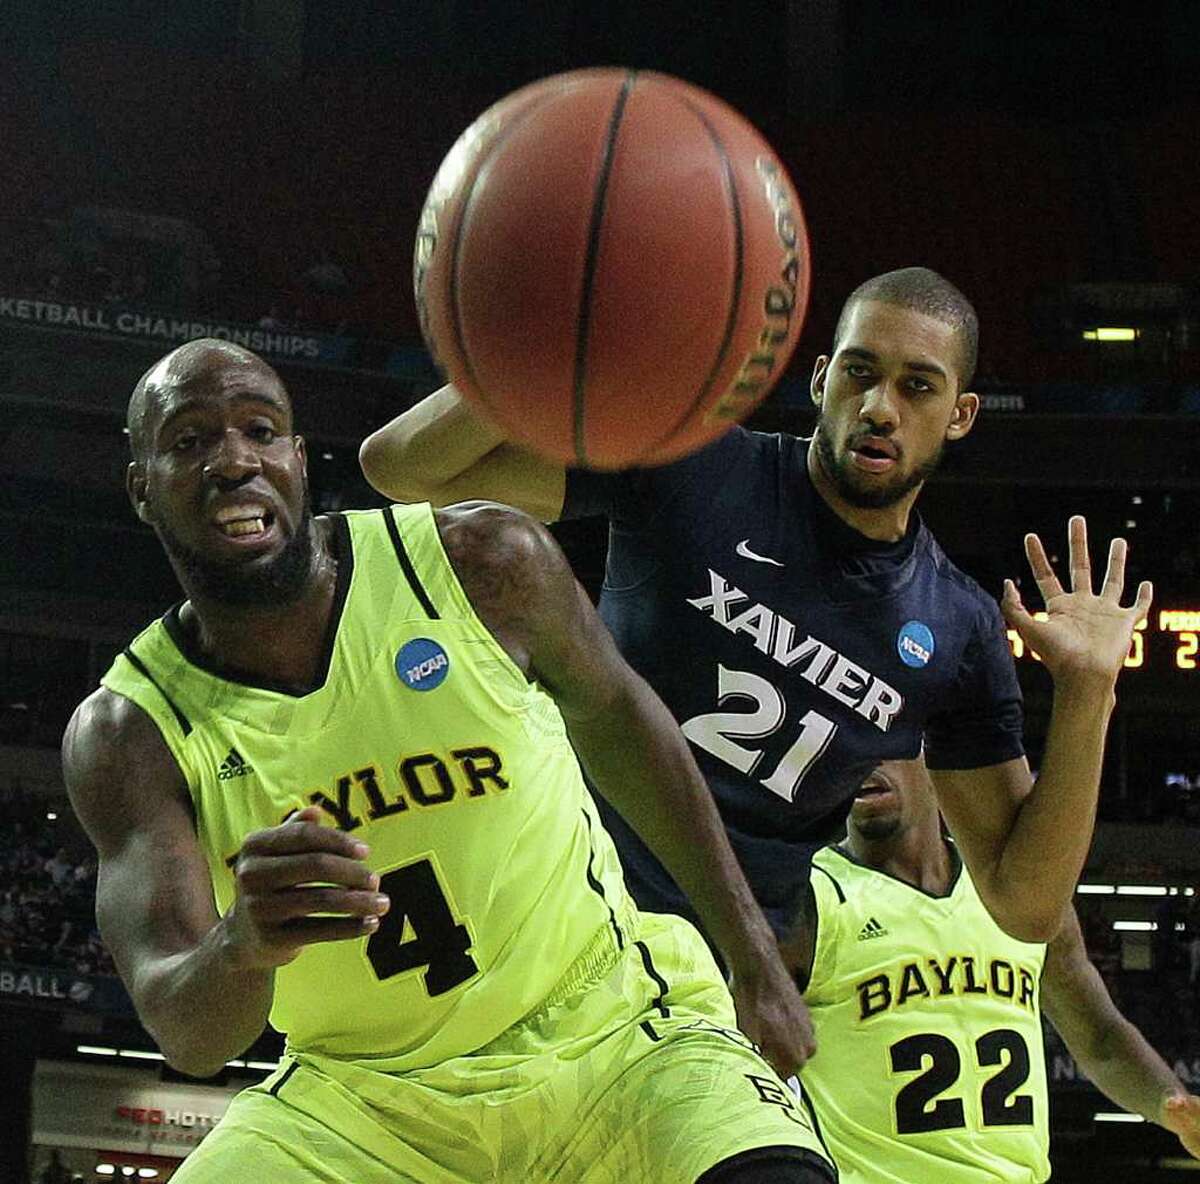 Baylor's Quincy Acy (4) and Xavier's Jeff Robinson (21) vie for a loose ball as Baylor's A.J. Walton looks on during the second half of an NCAA tournament South Regional semifinal college basketball game Friday, March 23, 2012, in Atlanta. (AP Photo/John Bazemore)